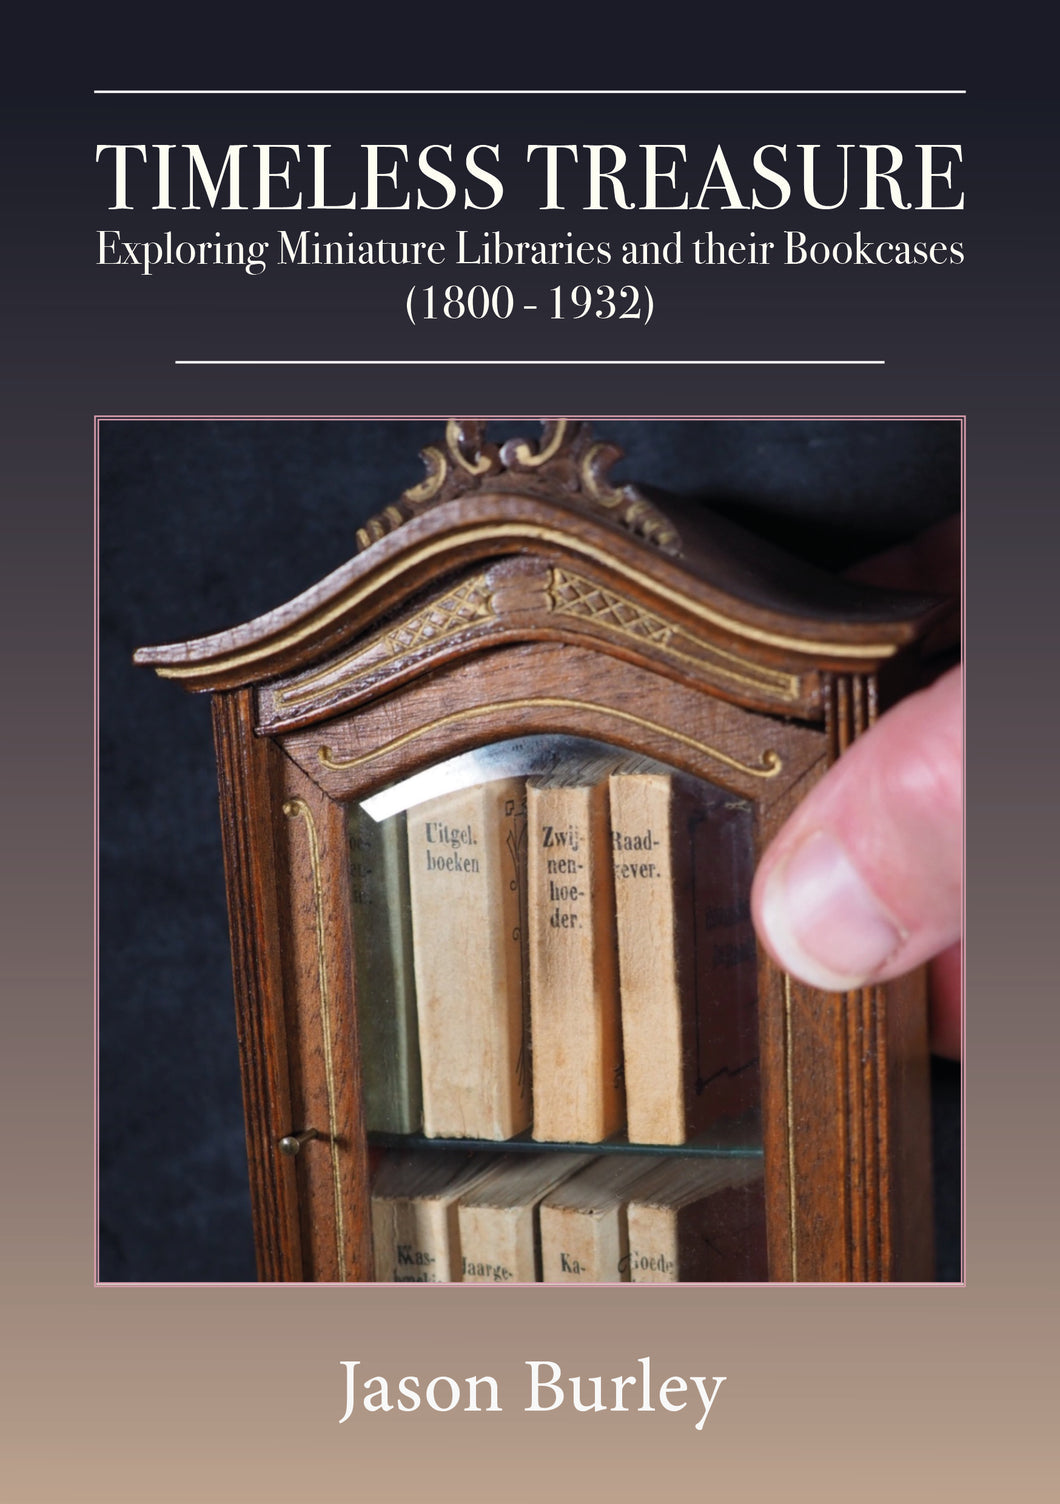 Timeless Treasure, Exploring Miniature Libraries and their Bookcases (1800-1932).